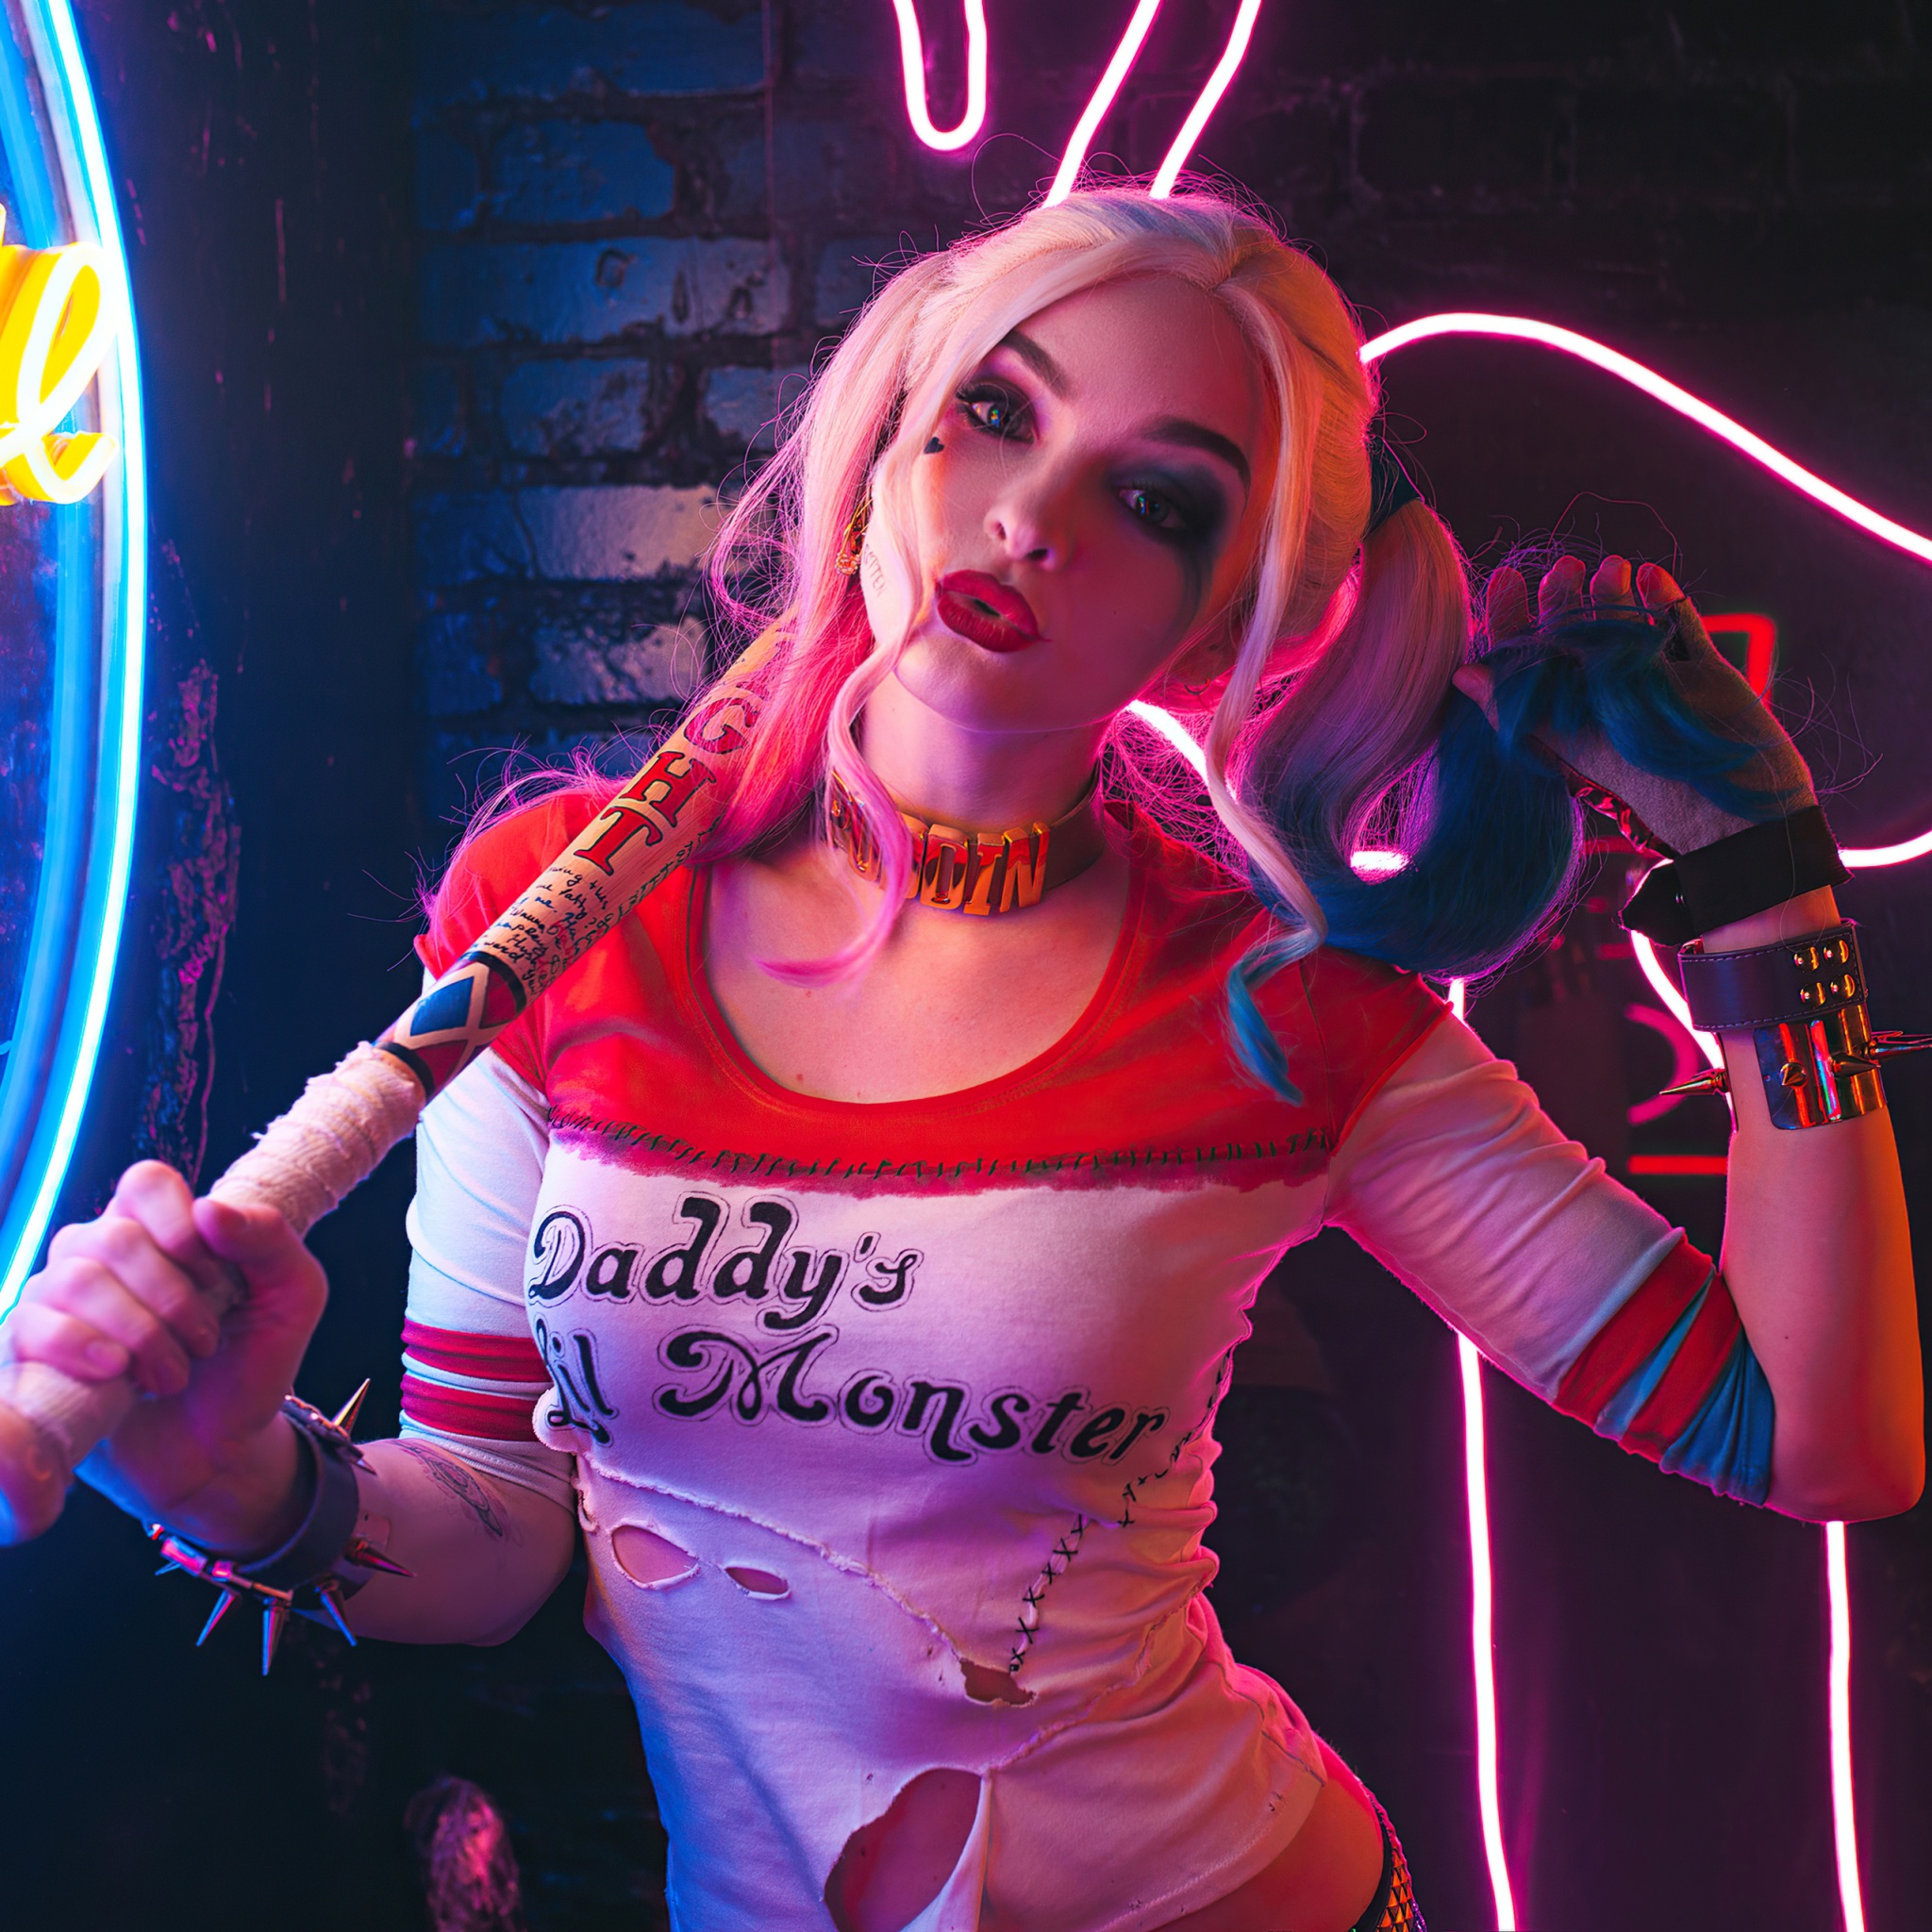 Harley Quinn Suicide Squad With Bat 4k - 4k Wallpapers - 40.000+ ipad ...